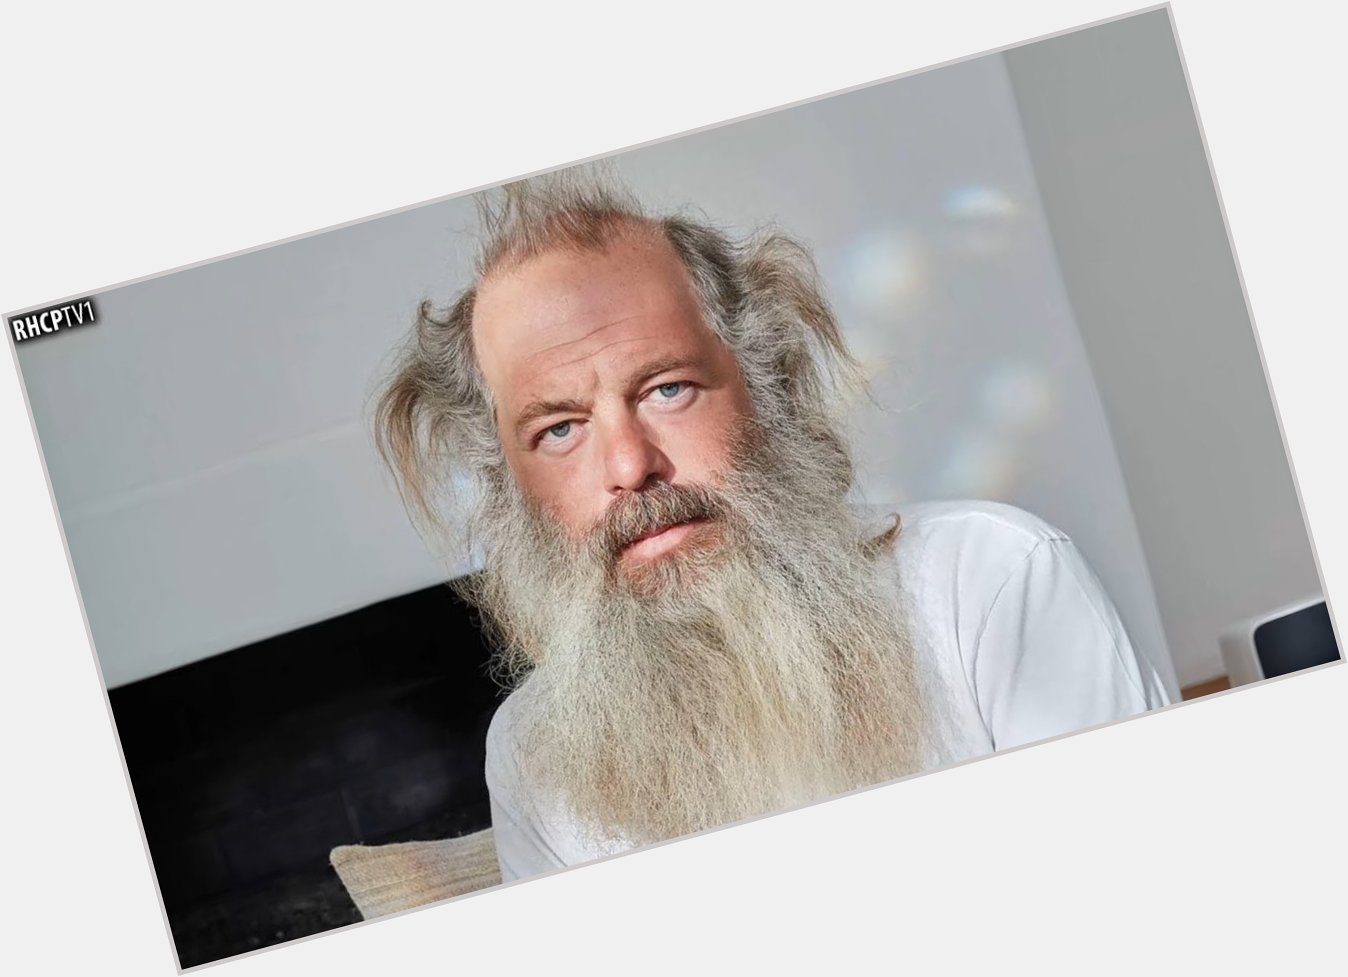 Happy 59 birthday to the amazing producer Rick Rubin (Black Sabbath, Slayer, RHCP, Johnny Cash, The Cult and more) 